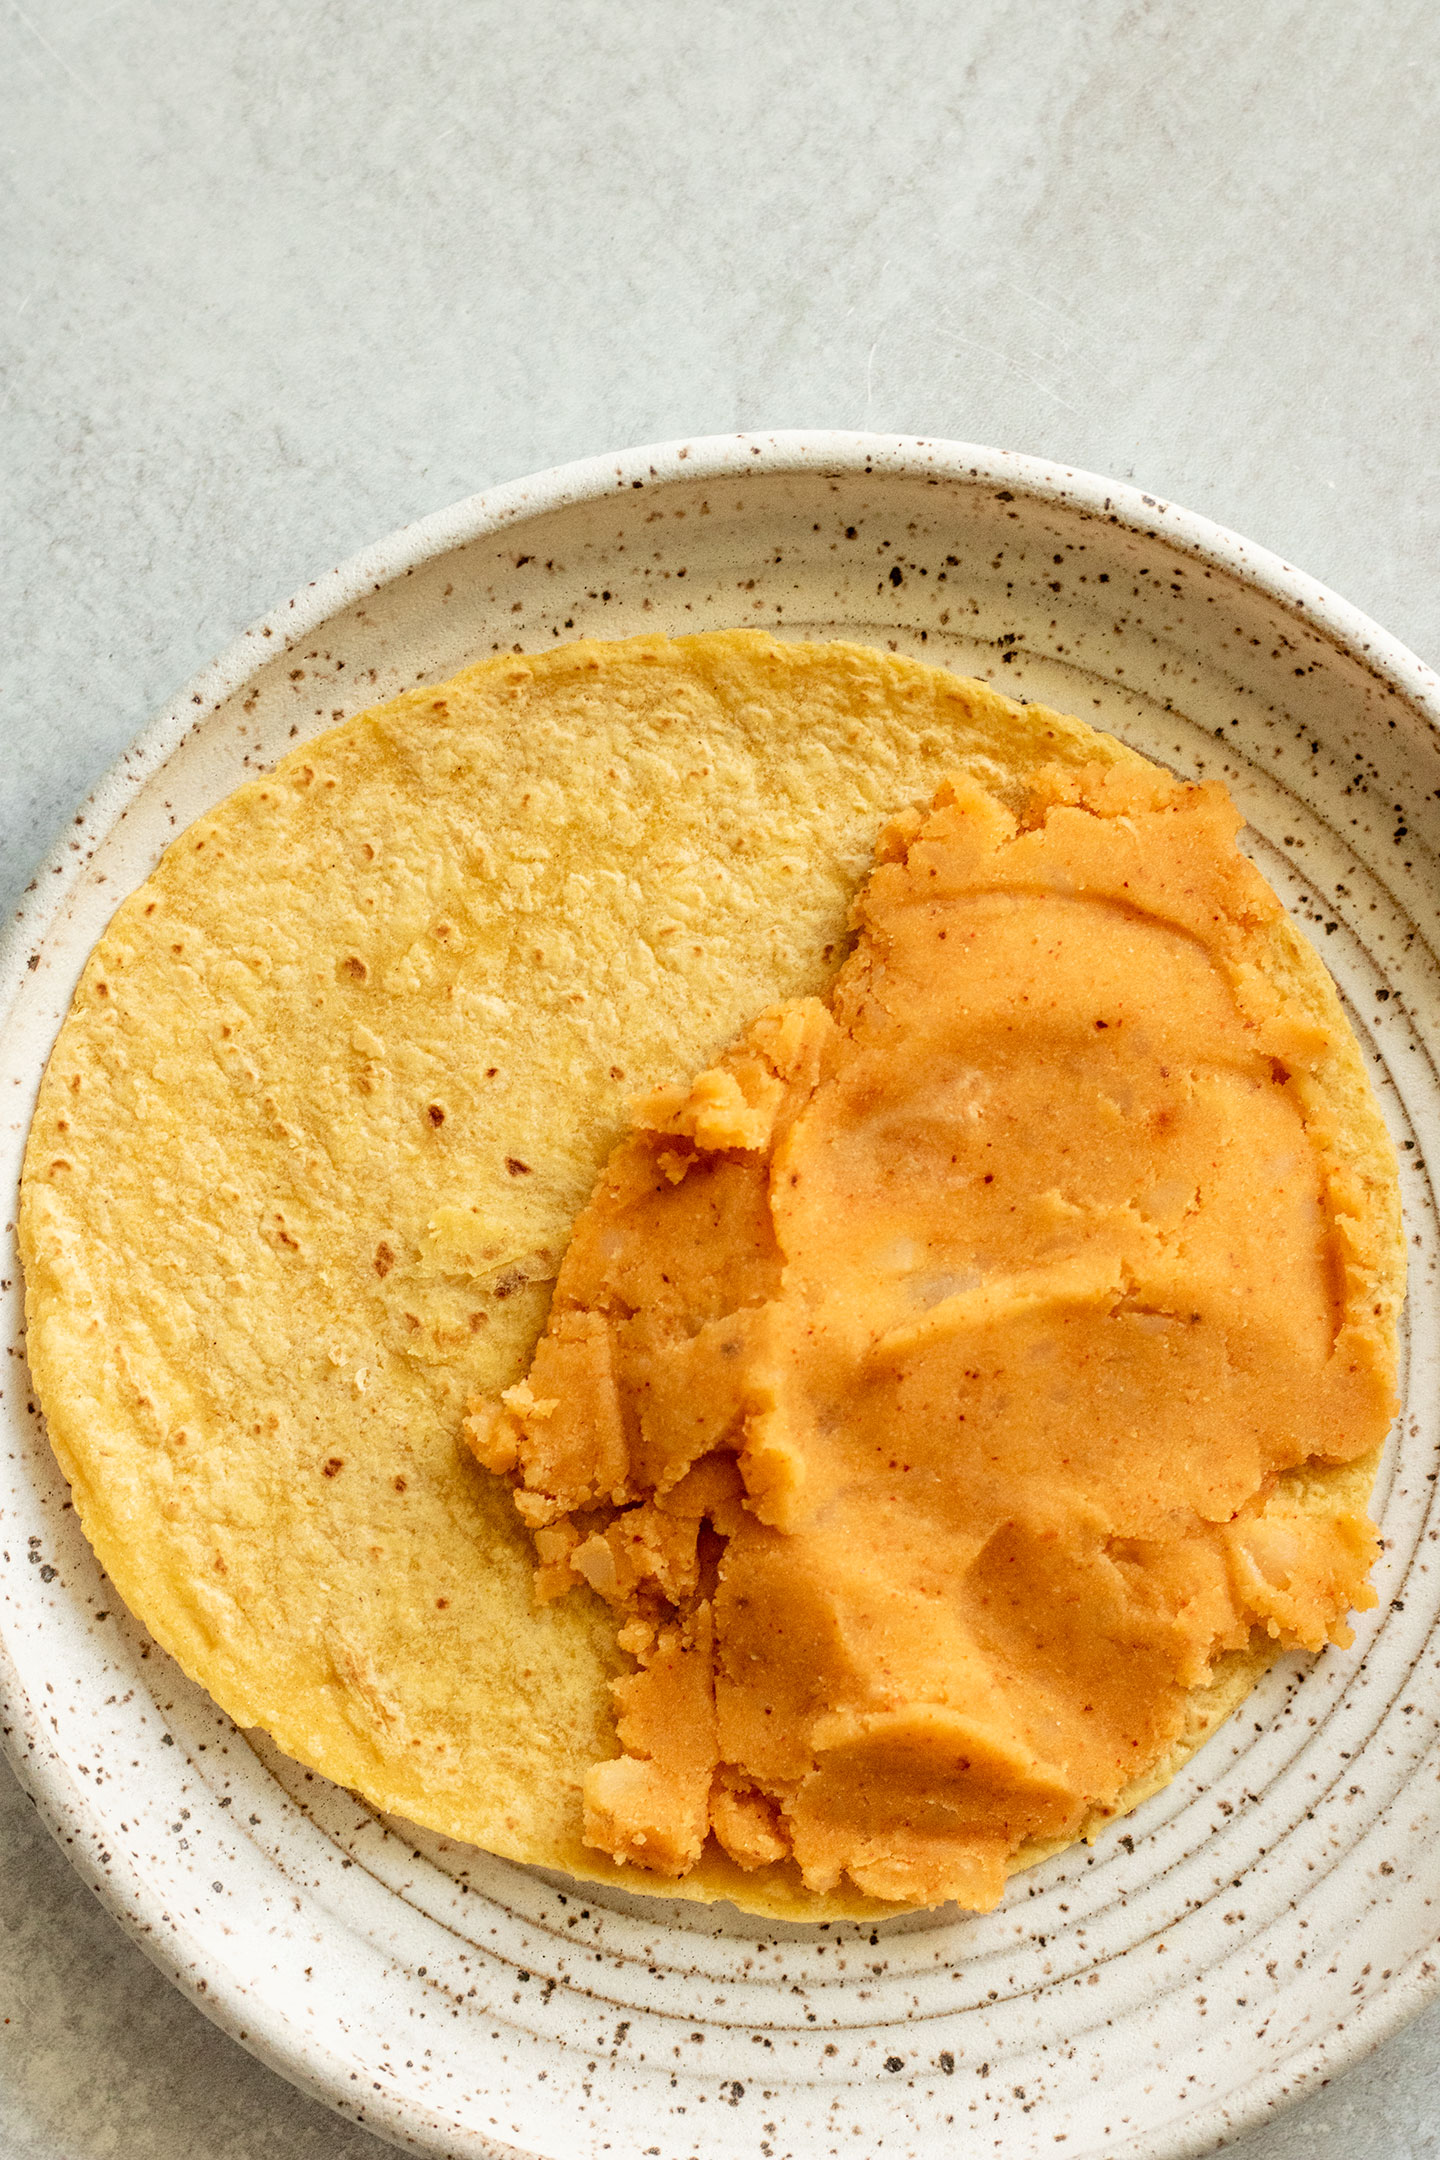 Spreading the seasoned mashed potatoes over half of the warmed yellow corn tortilla.